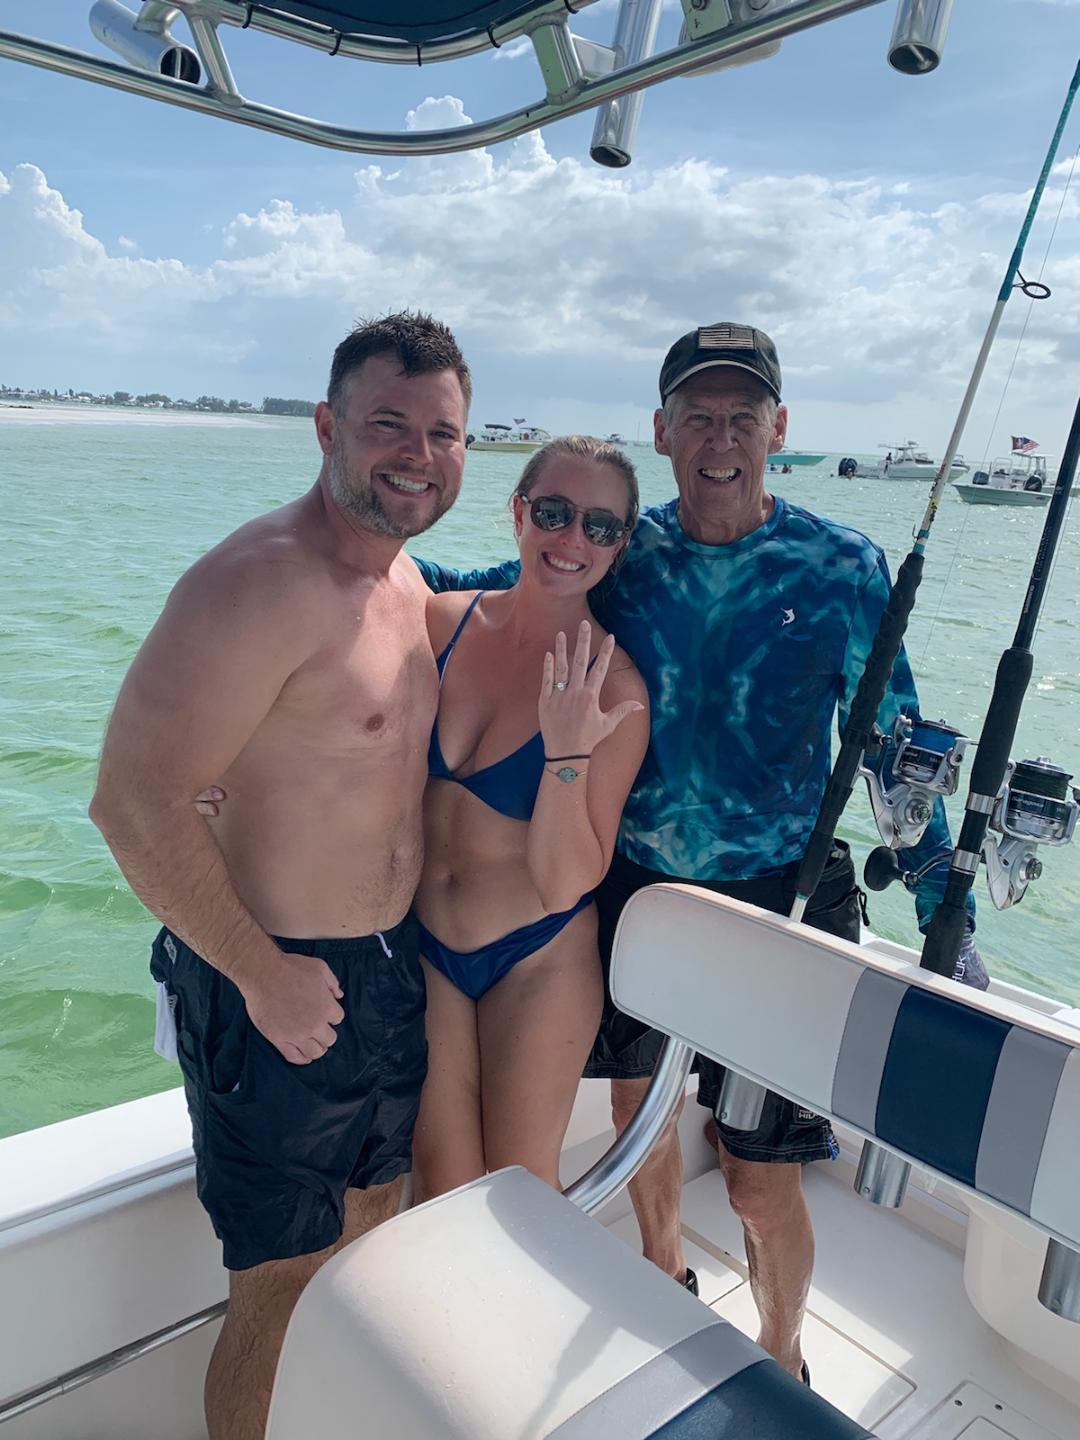 Ring Lost On Passage Key, Recovered By SRARC